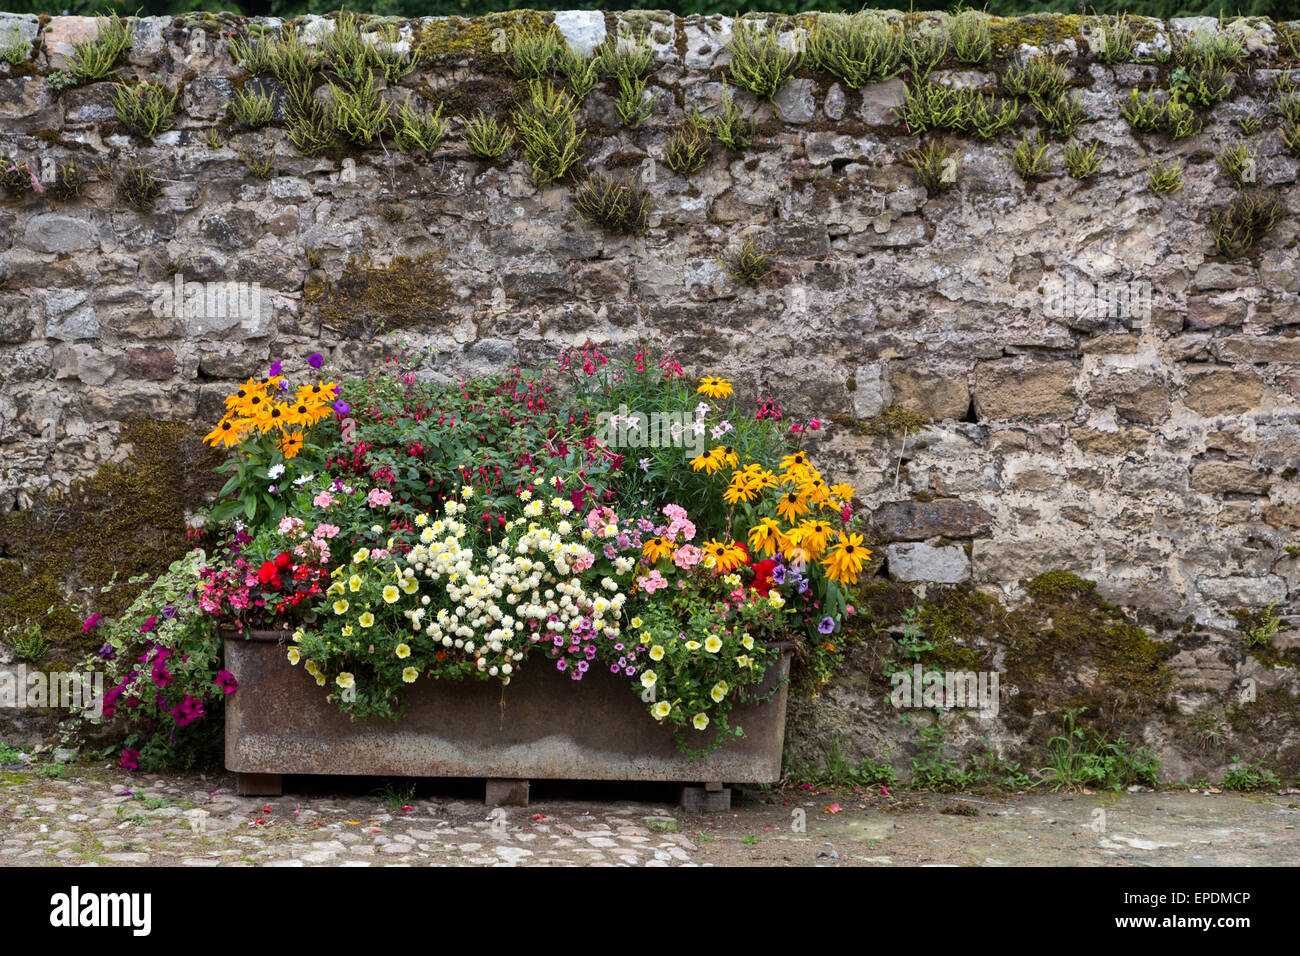 UK, England, Yorkshire.  Flower Box in Autumn, Old Stone Wall Behind. Stock Photo